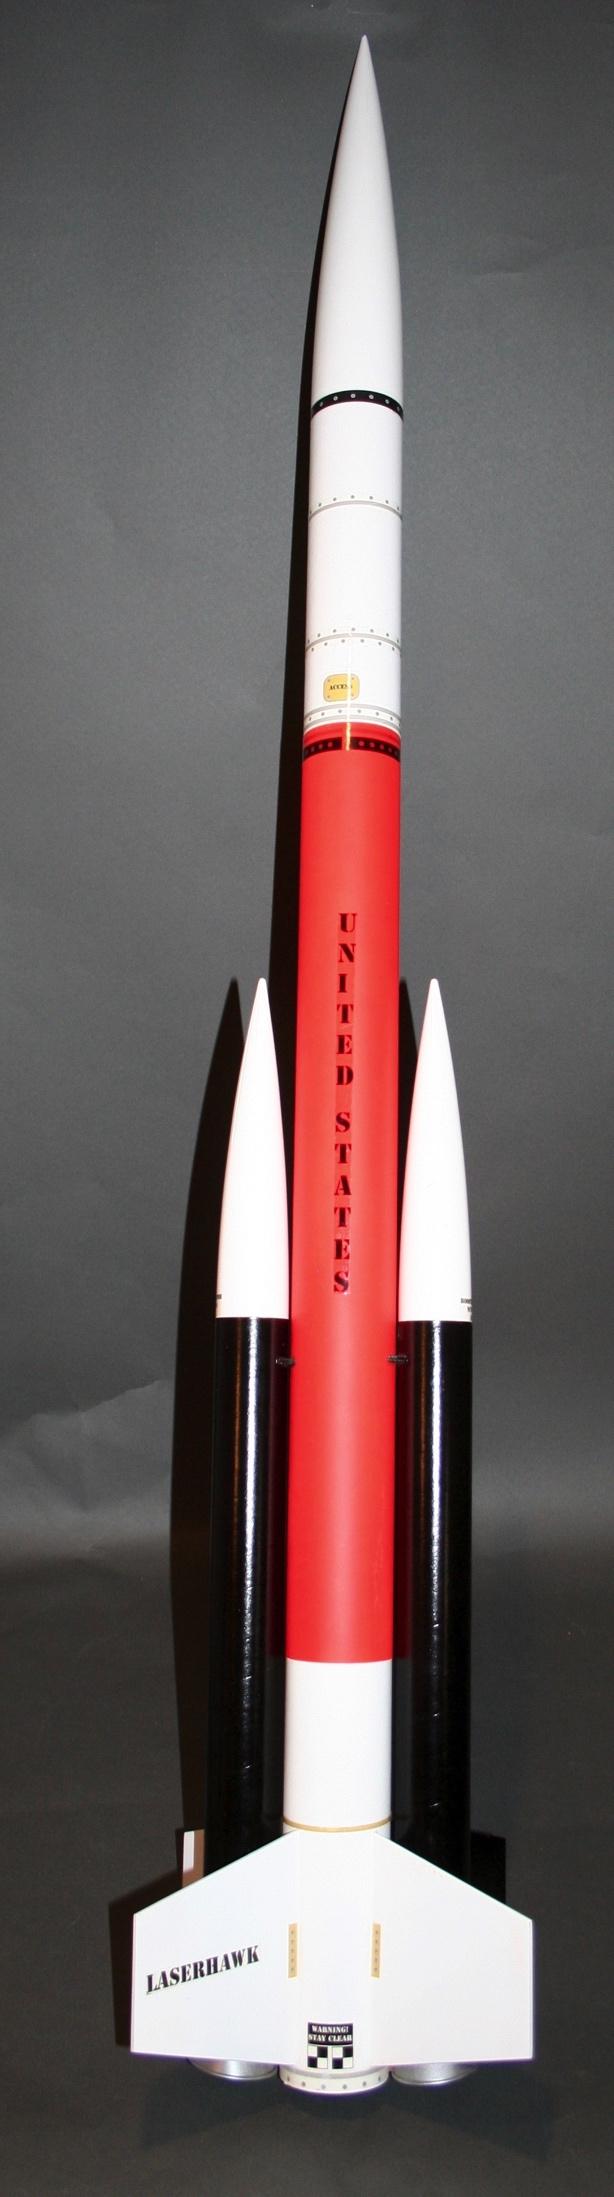 North Coast Rocketry certifies that it has exercised reasonable care in the design and manufacture of its products.